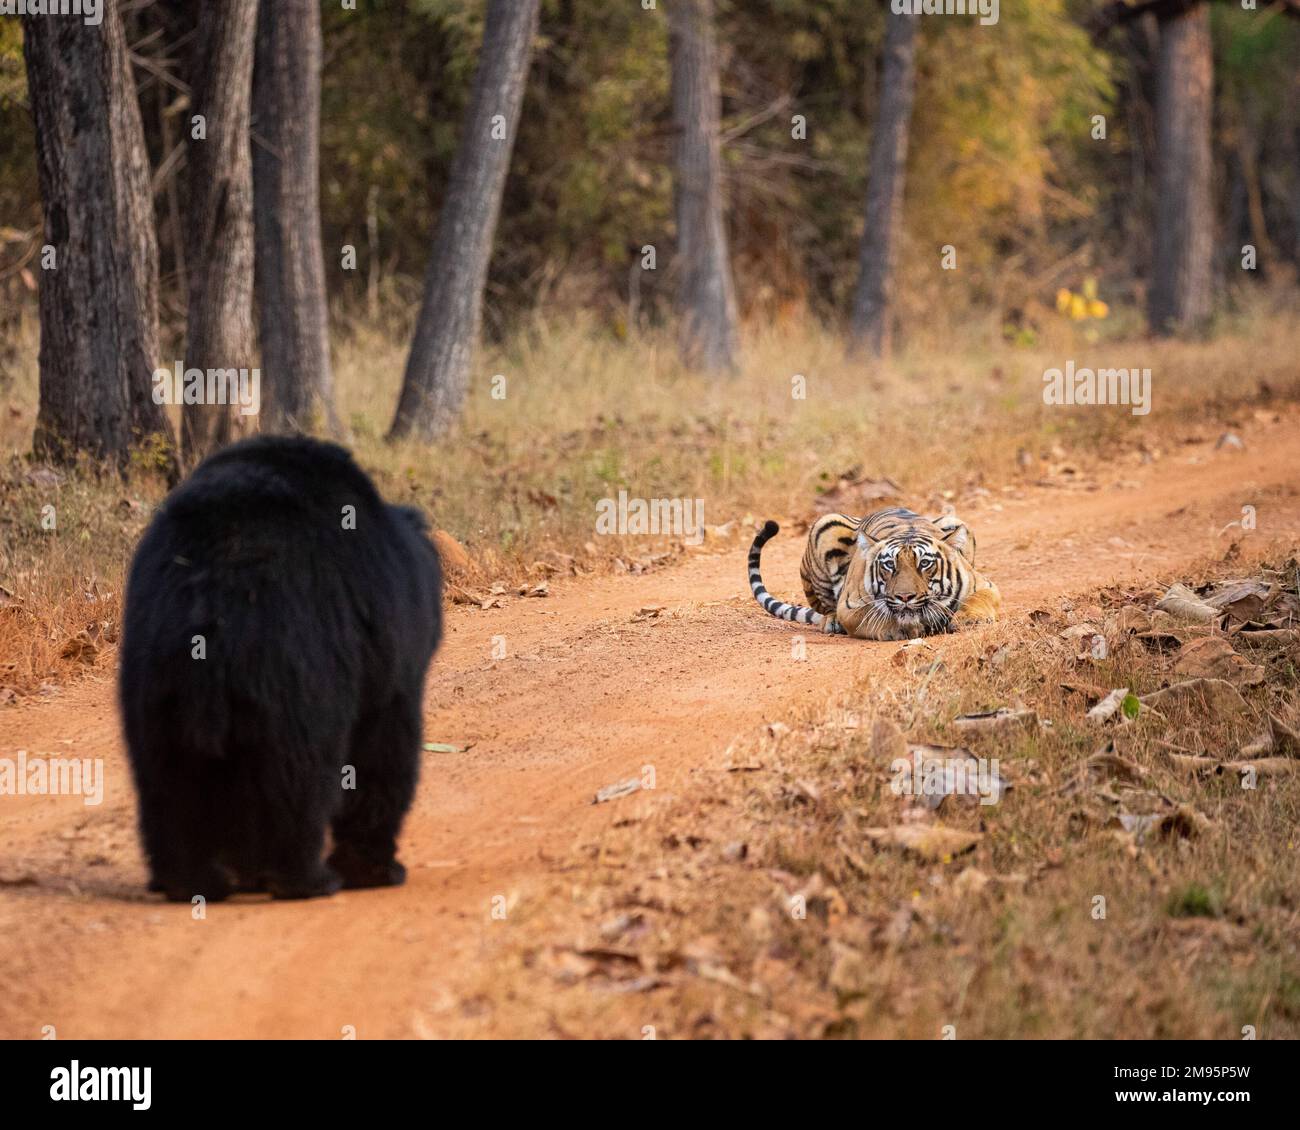 An intruder approaches. India: THESE IMAGES show an incident of bullying between a tiger and a sloth bear after a freak encounter.  One image shows Ro Stock Photo